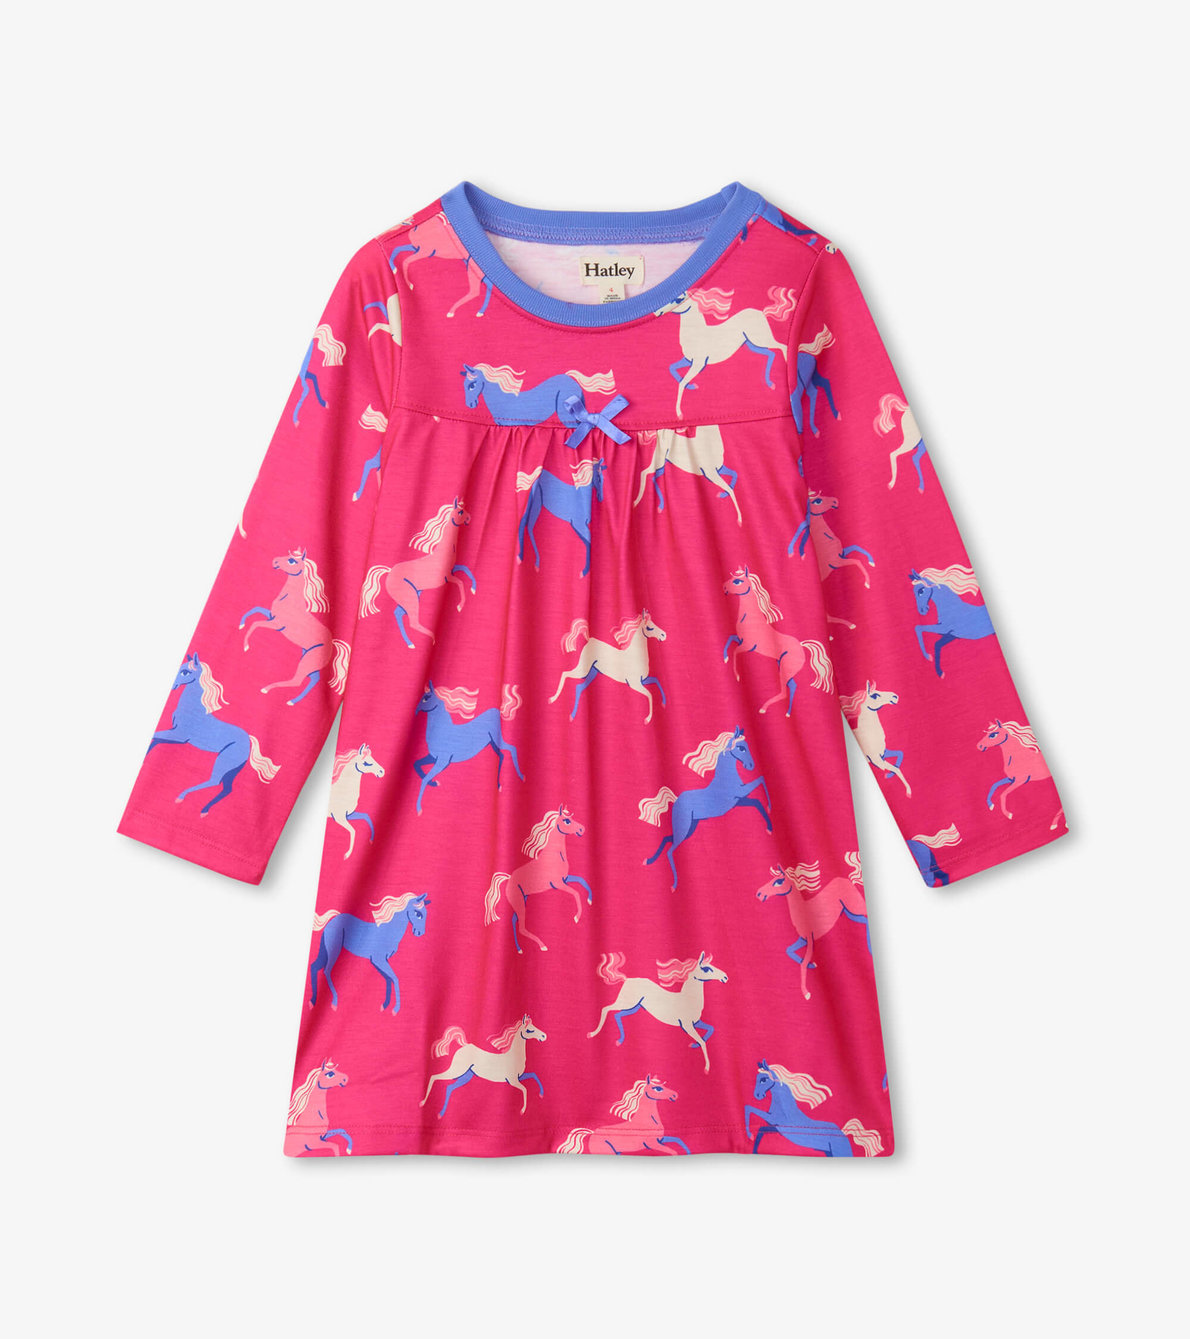 View larger image of Dreamland Horses Long Sleeve Girls Nightgown